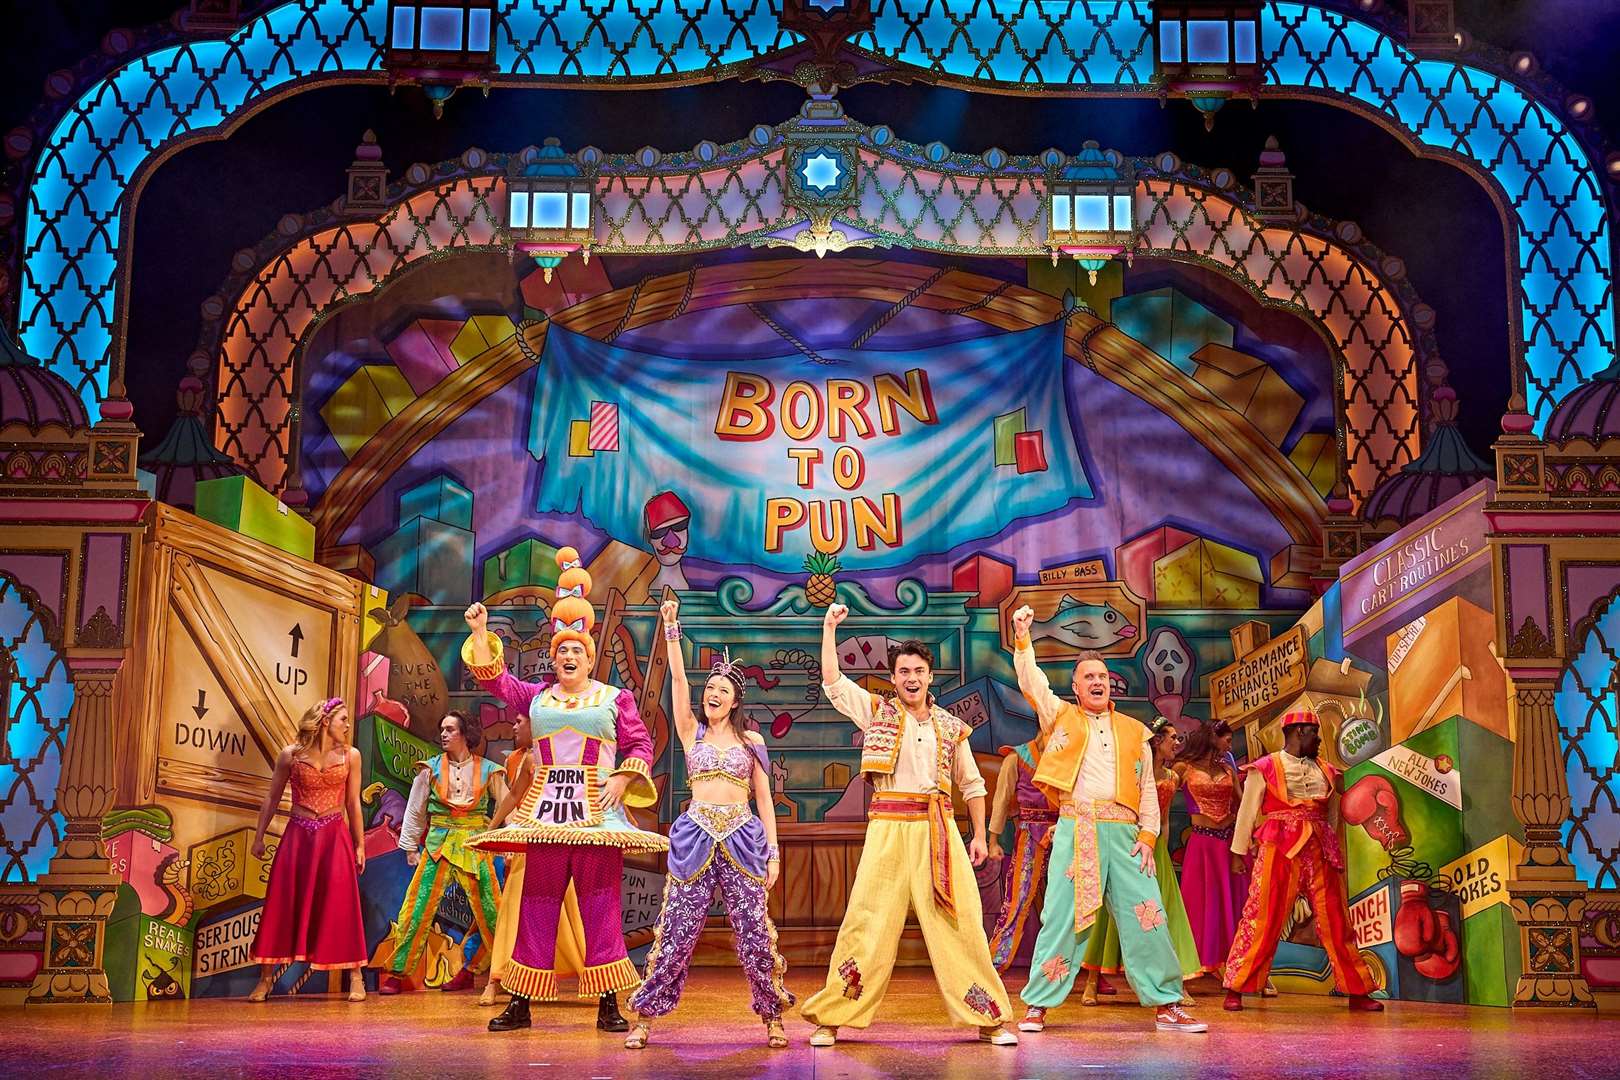 We took our seats to see this year’s Marlowe Theatre panto, Aladdin. Picture: Manuel Harlan